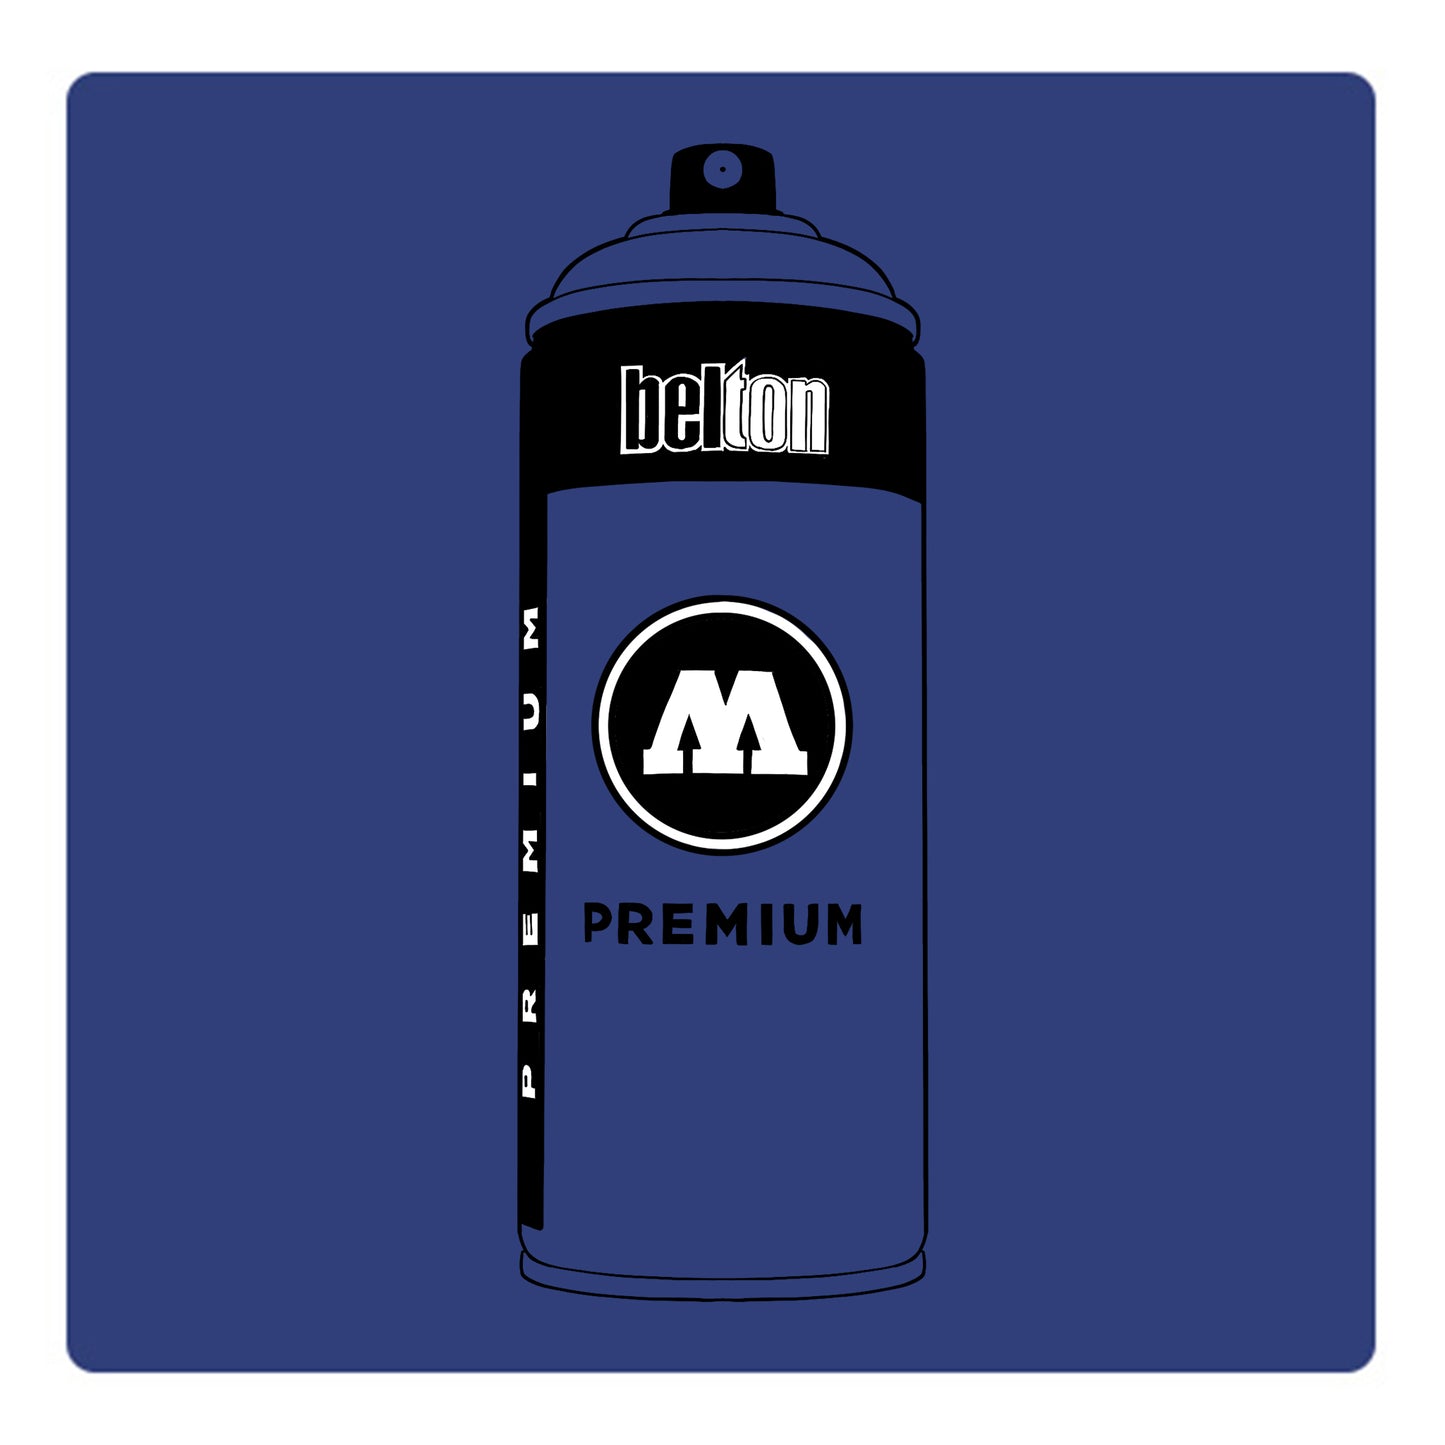 A black outline drawing of a liberty blue spray paint can with the words "belton","premium" and the letter"M" written on the face in black and white font. The background is a color swatch of the same liberty blue with a white border.